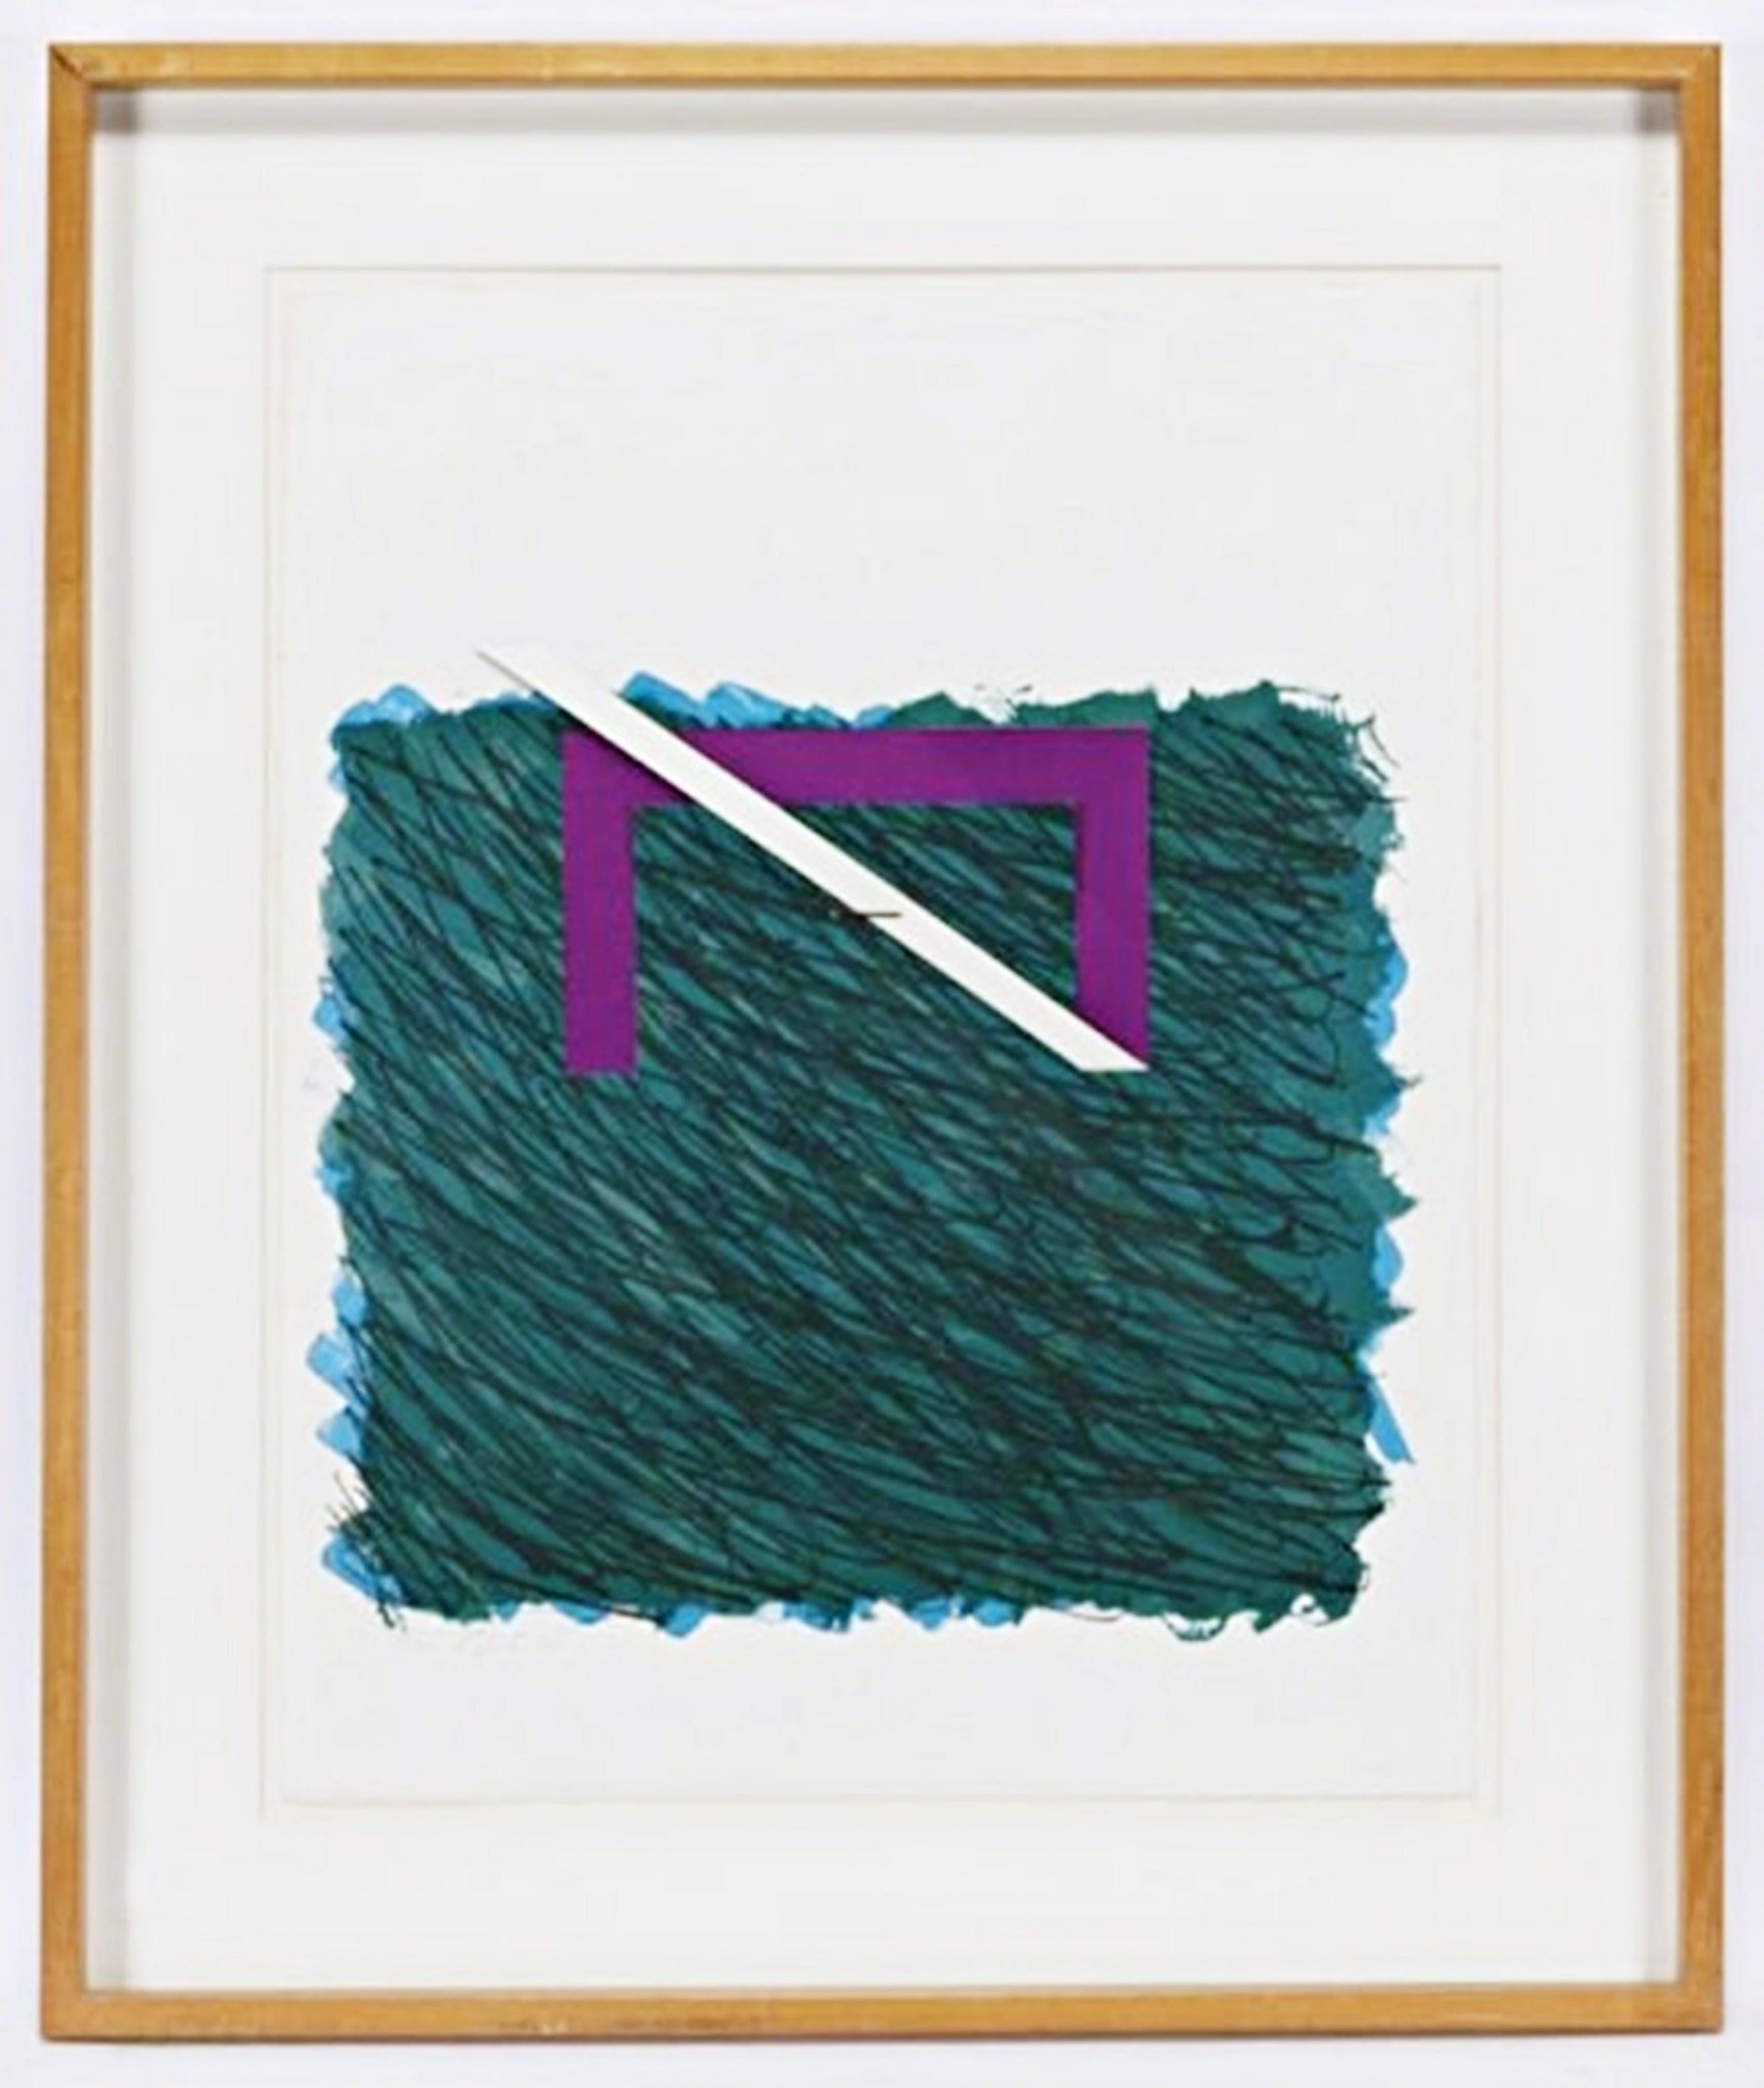 Richard Smith Abstract Print - Bramble, 1970 lithograph by renowned British Pop art pioneer Signed/N, Framed